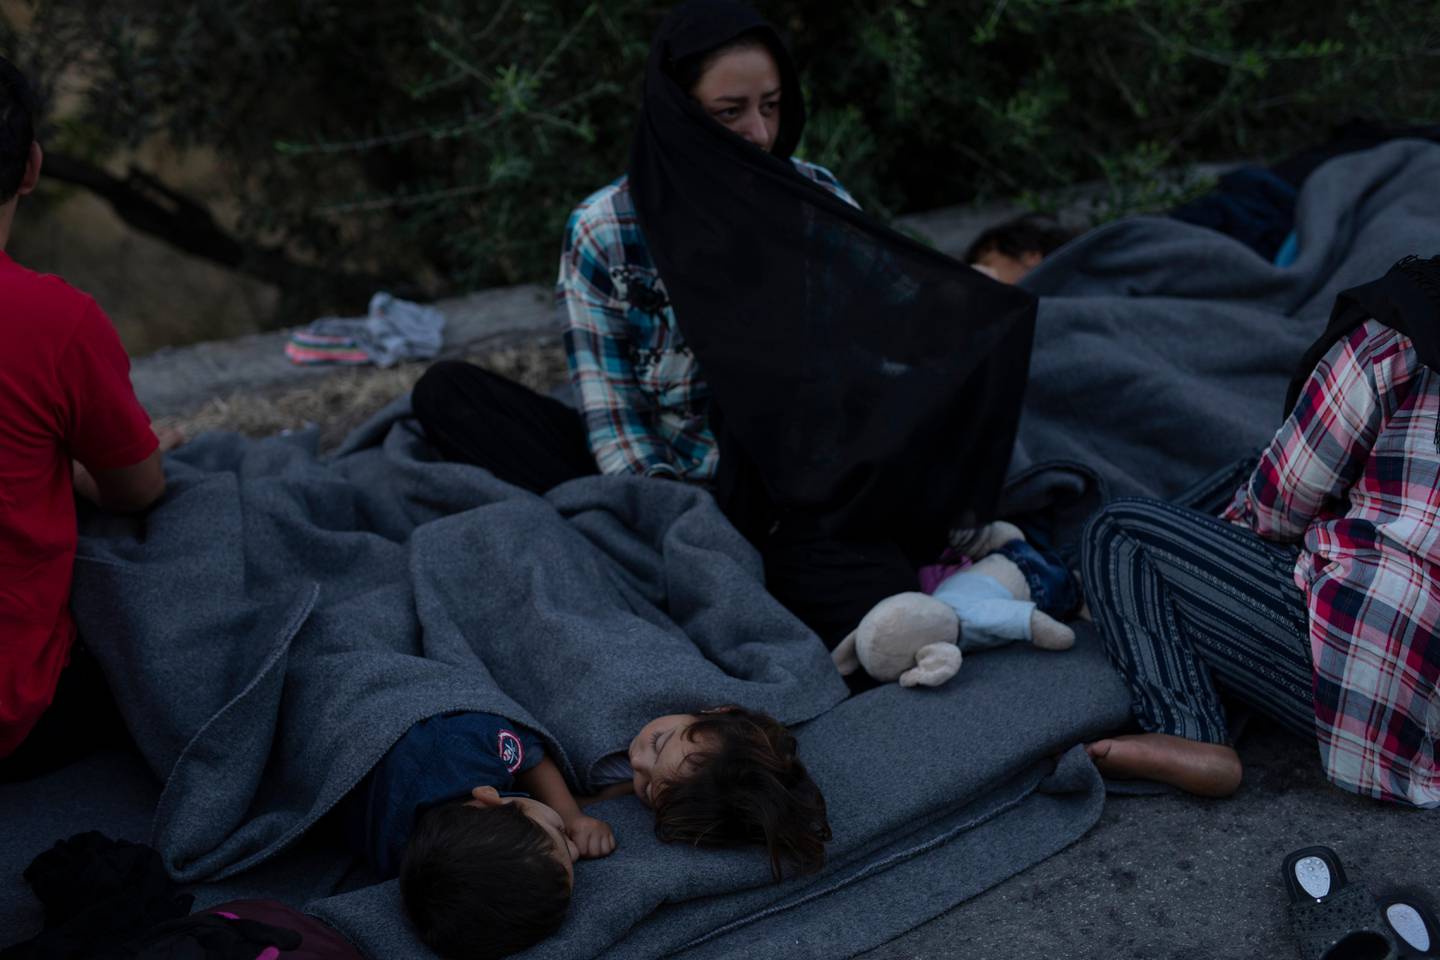 Migrants sleep on the road near the Moria refugee camp on the northeastern island of Lesbos, Greece, Thursday, Sept. 10, 2020. A second fire in Greece's notoriously overcrowded Moria refugee camp destroyed nearly everything that had been spared in the original blaze, Greece's migration ministry said Thursday, leaving thousands more people in need of emergency housing. (AP Photo/Petros Giannakouris)